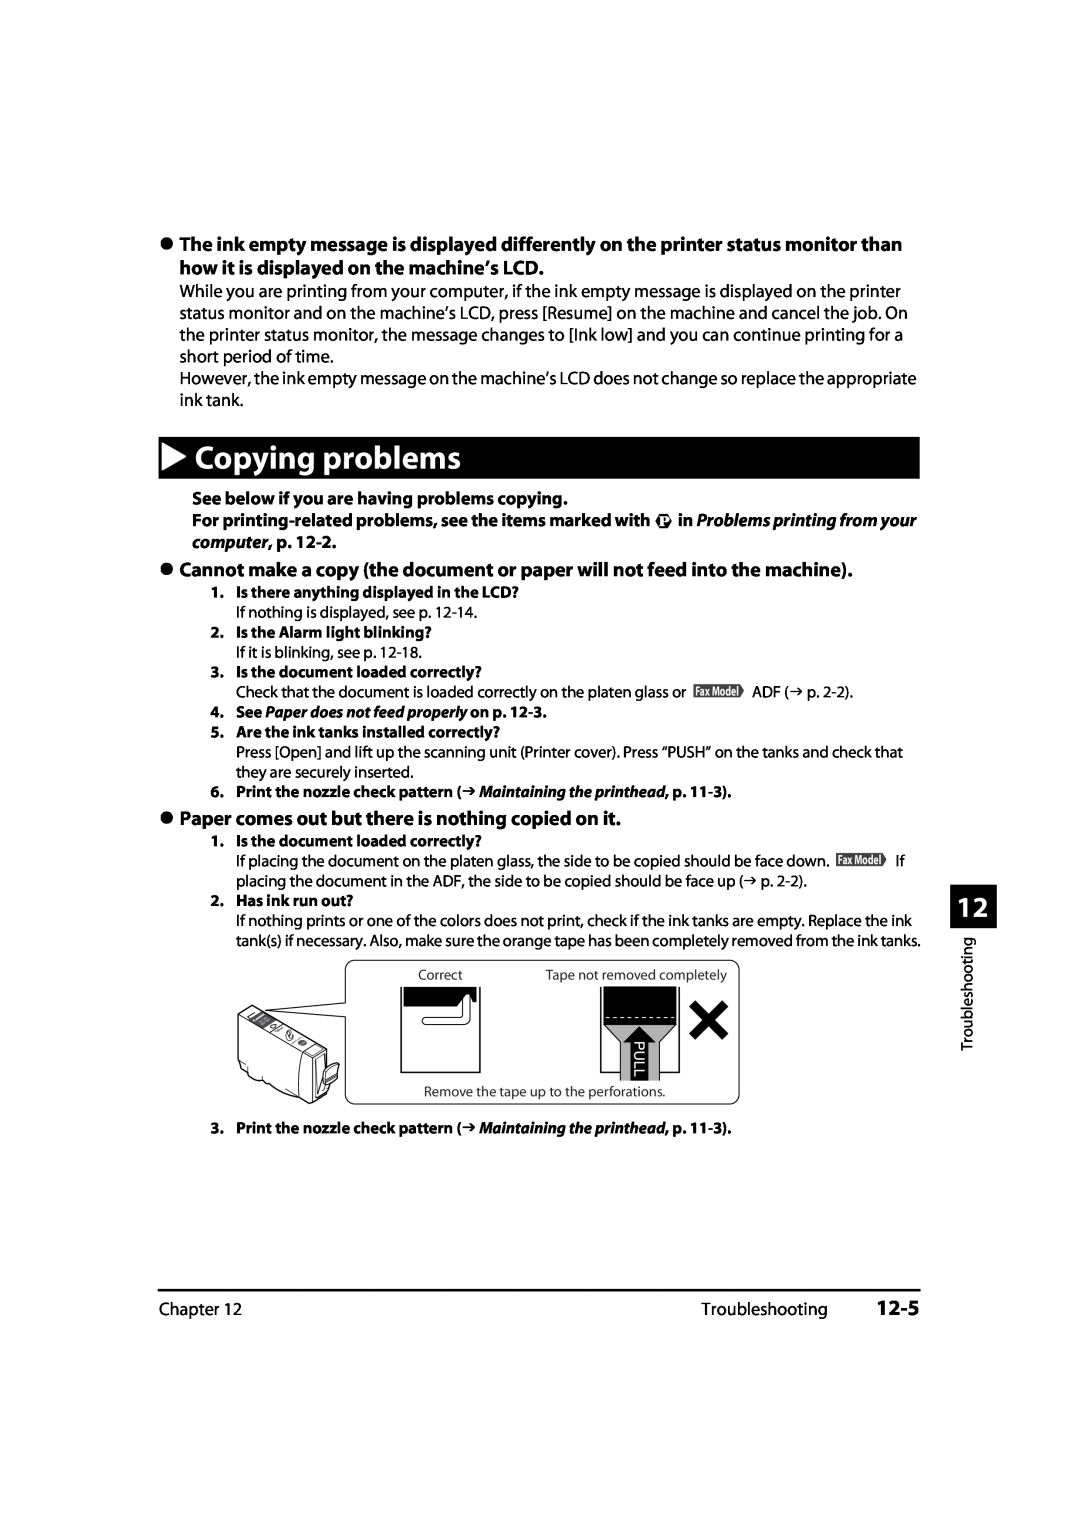 Canon 730i, MultiPASS MP730, MP700 manual Copying problems, 12-5, Paper comes out but there is nothing copied on it 